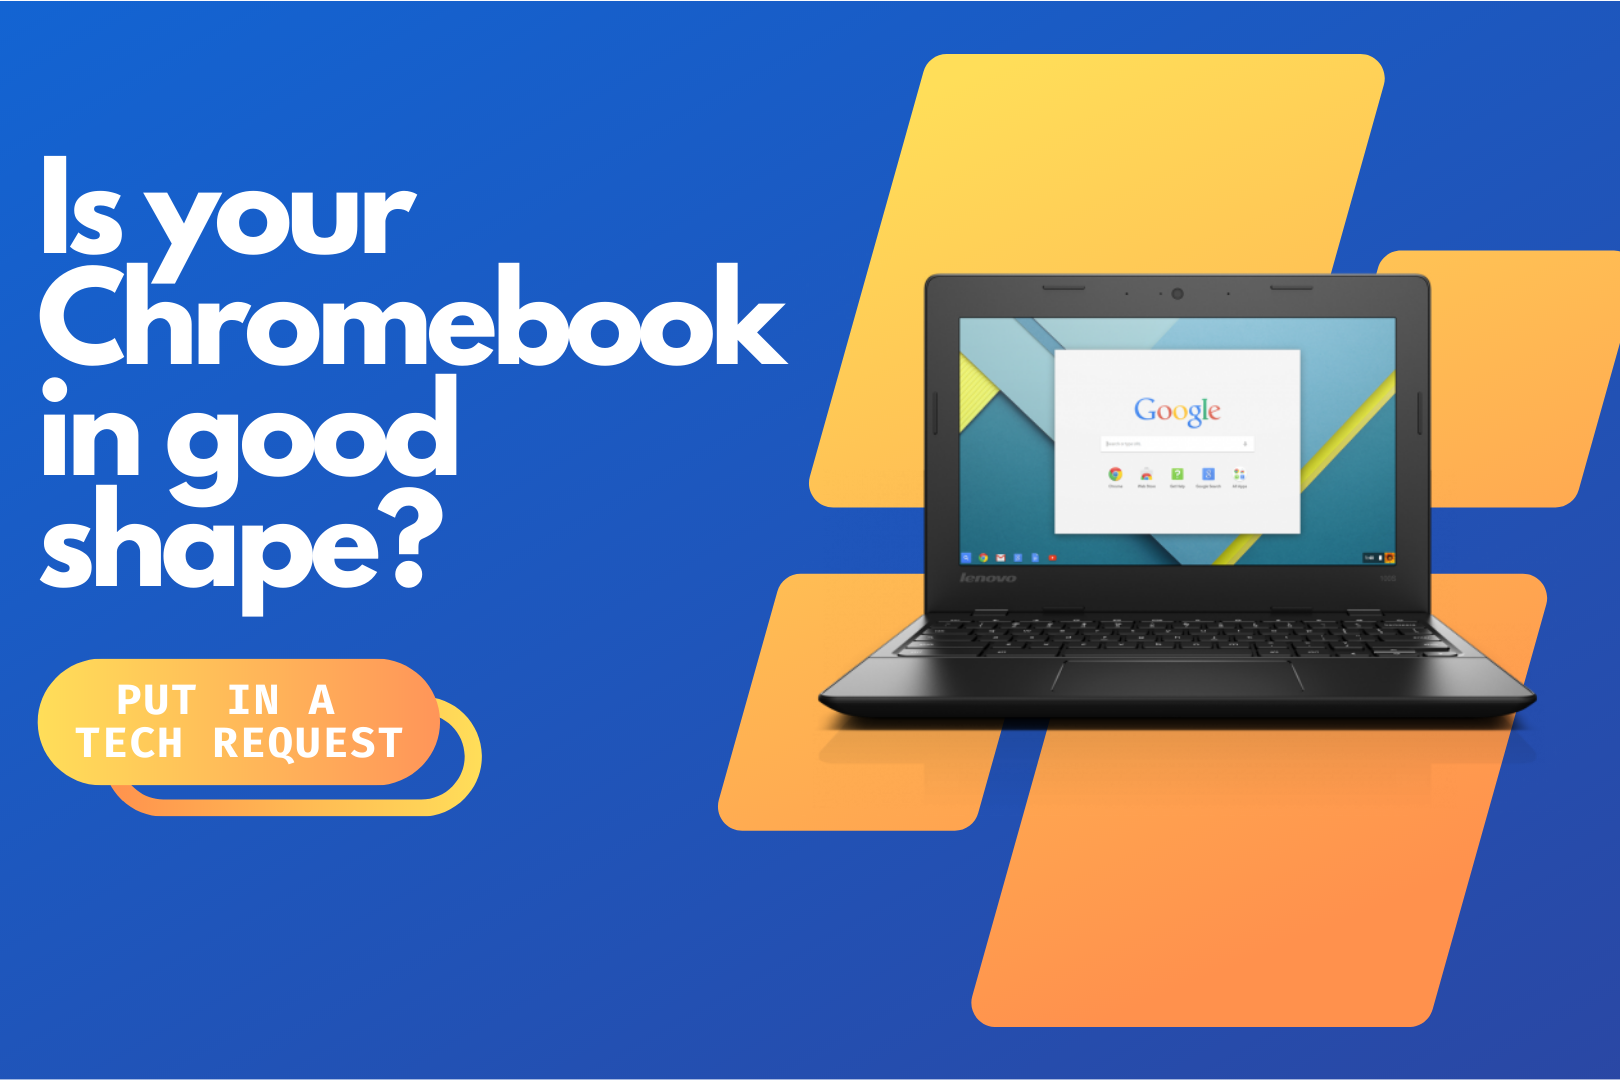 Is your Chromebook in good shape? Put in a Tech Request